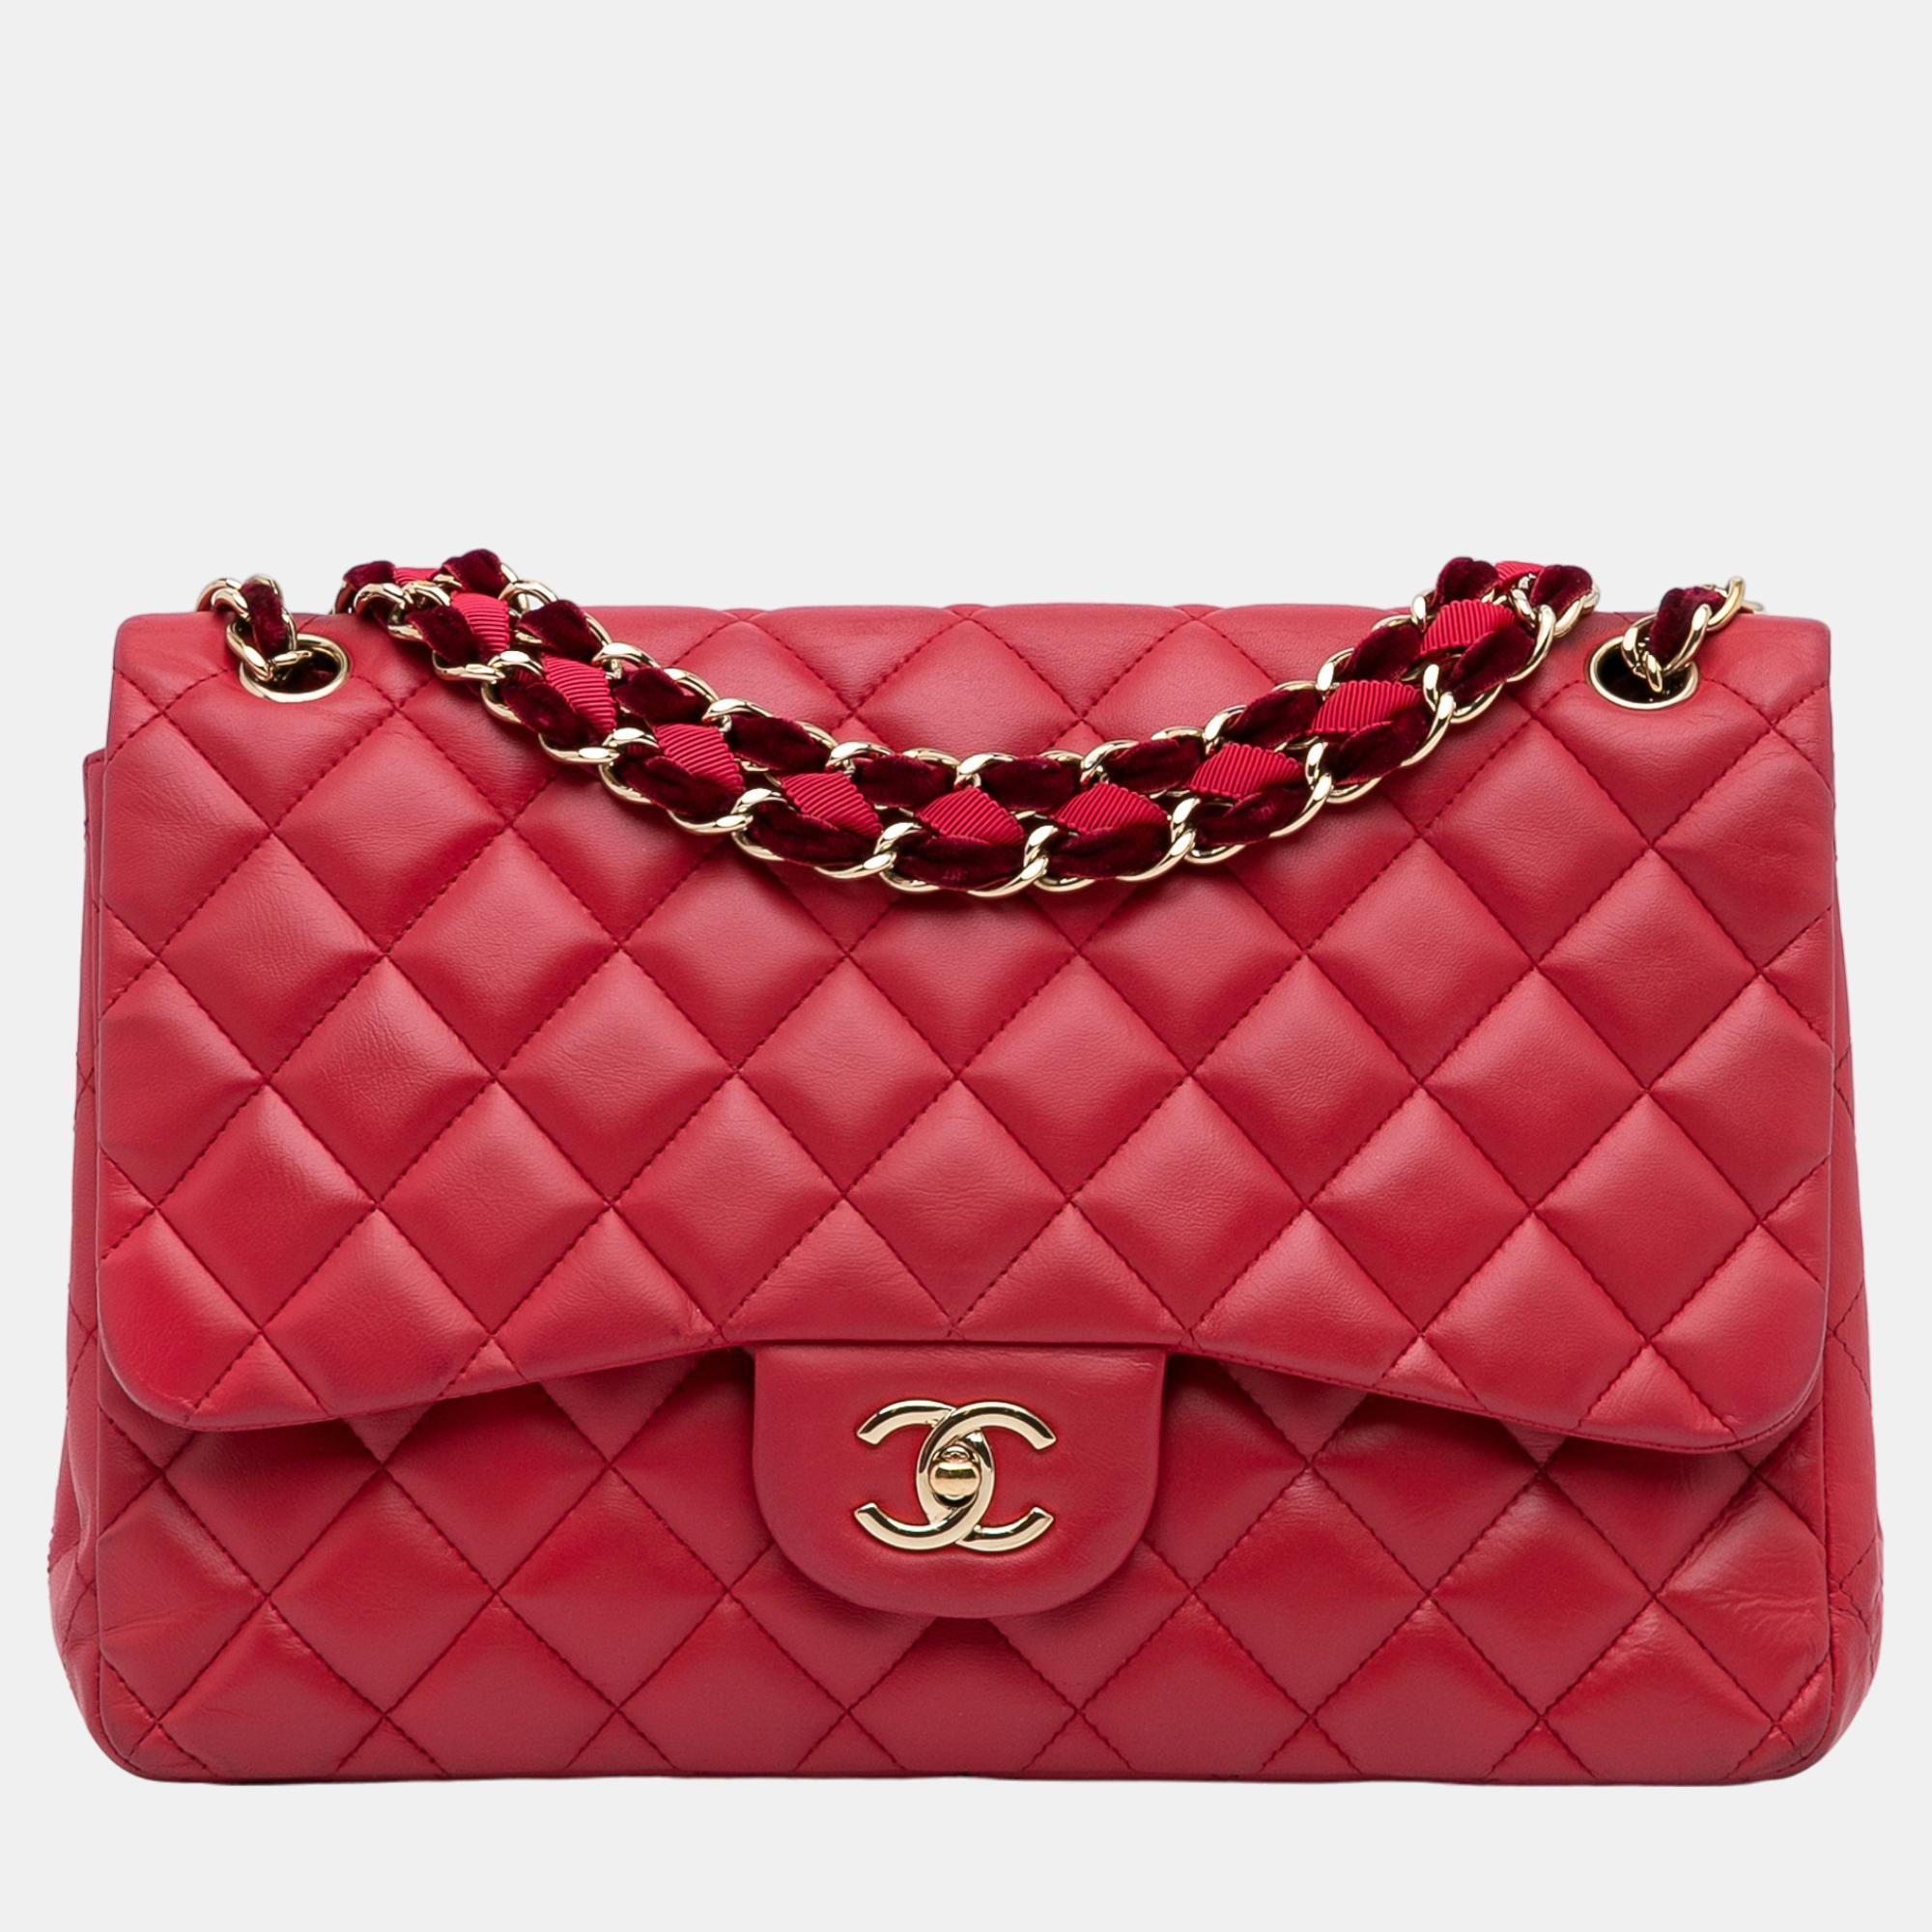 Chanel Red Jumbo Joined Chain Flap Bag